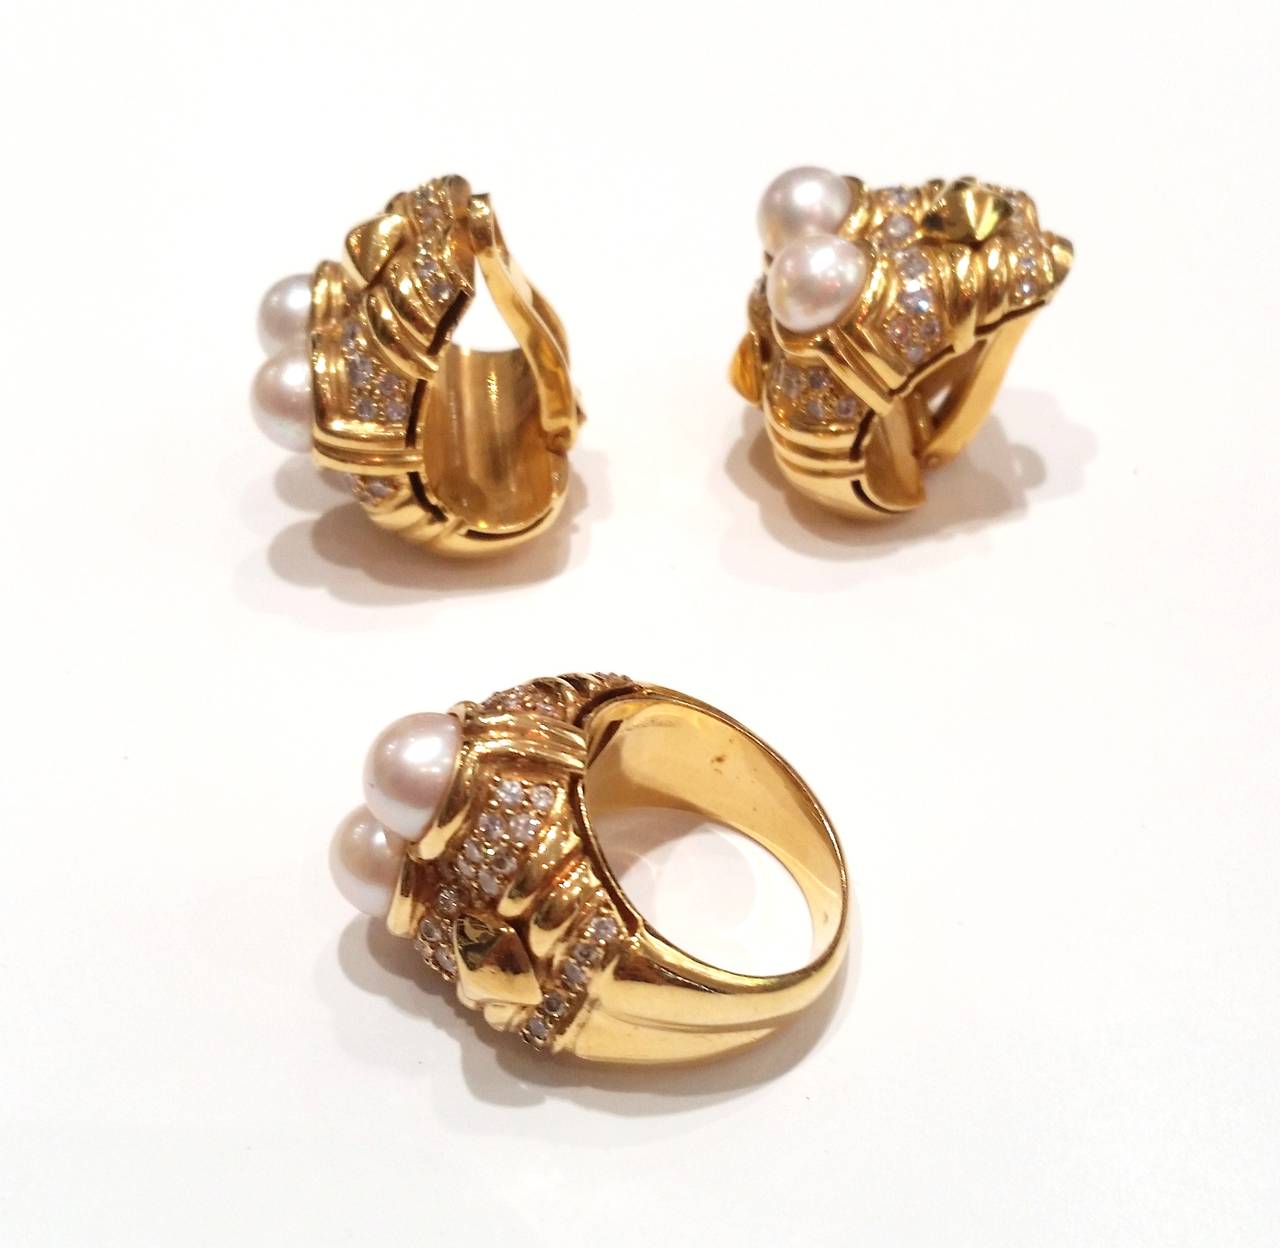 Earrings and Ring Suite
Made of yellow gold, with cultured pearls and brilliant cut diamonds (total weight approx. 1.68ct)

Ring Size
US 6 1/4
EU 13

Weight:
Ring 16.6gr
Earrings 34gr